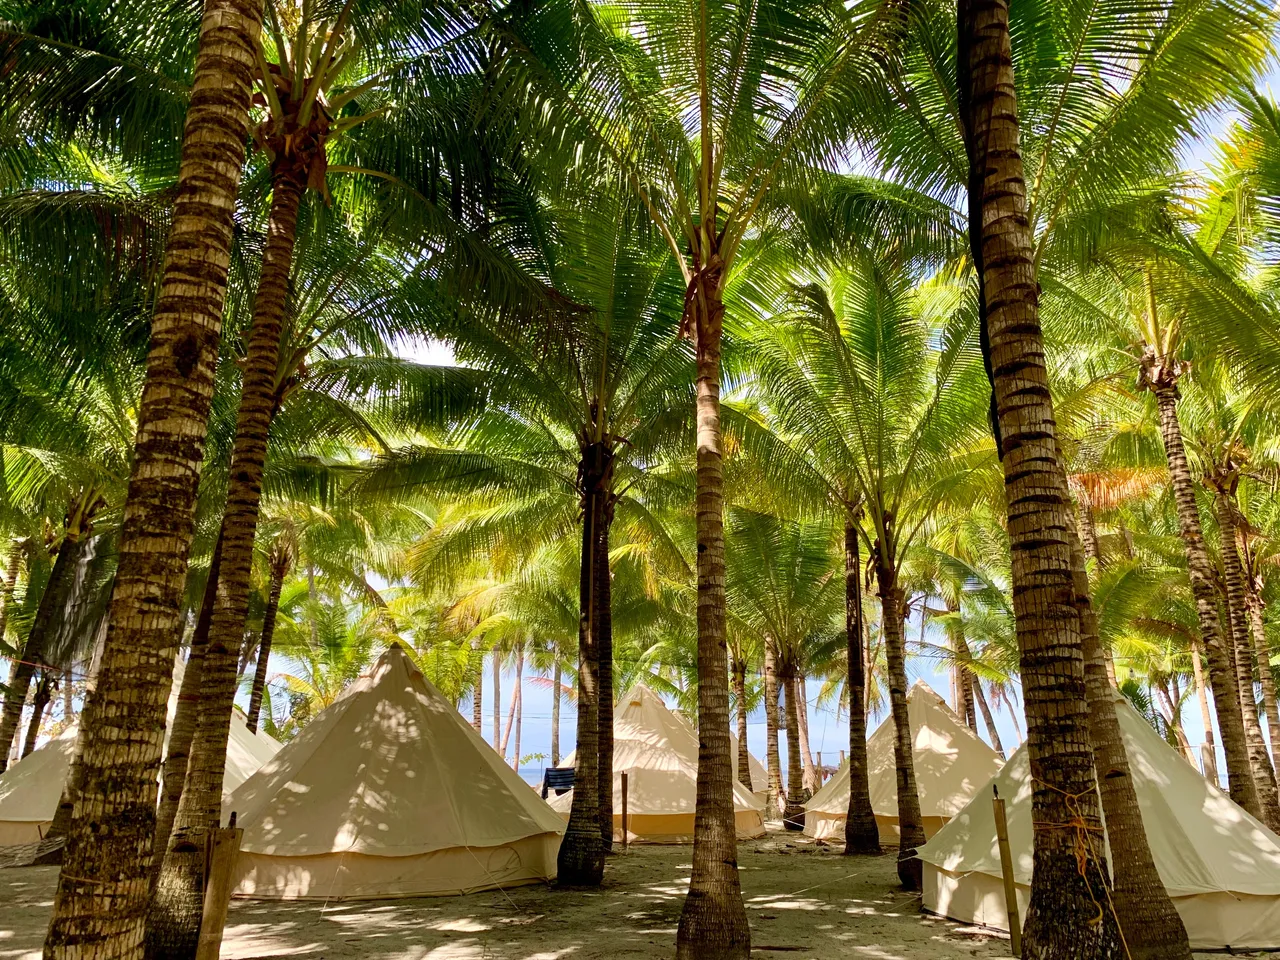 Tall palm trees surround the glamping tents, offering a refreshing tropical vibe